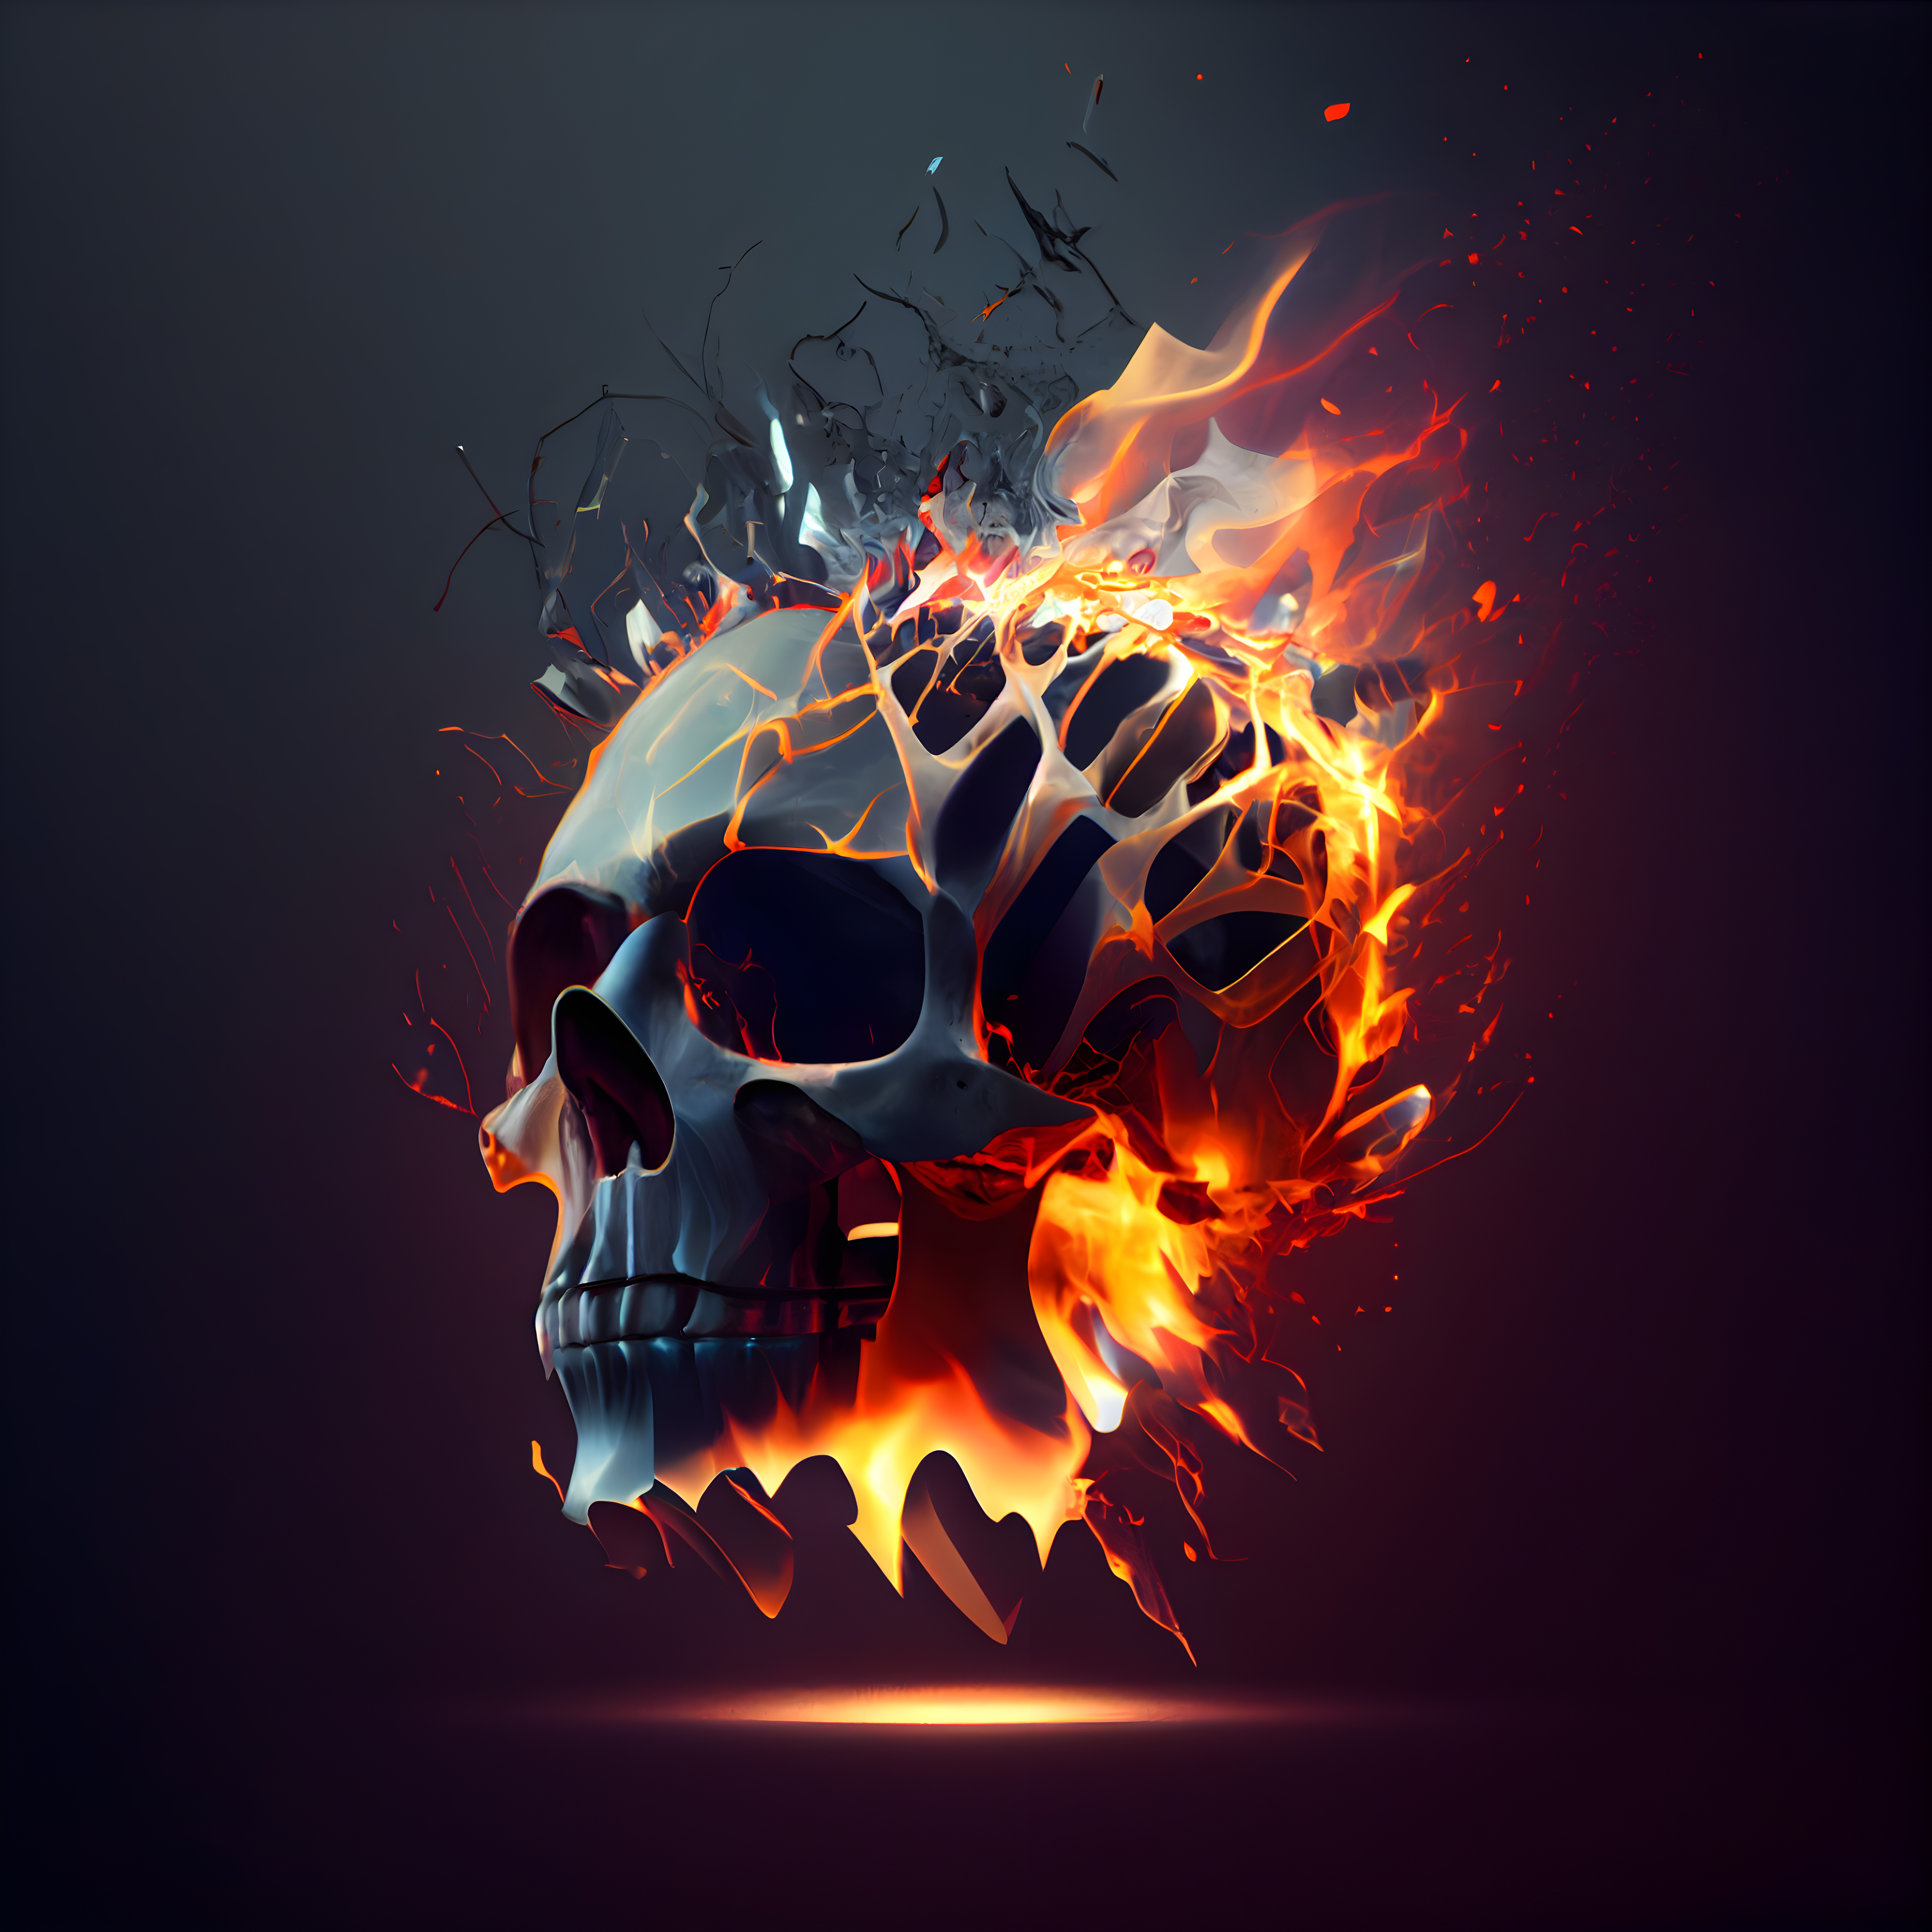 Wallpaper 3d Image In The Style Of Fire Skull Background Flaming Skull  Picture Background Image And Wallpaper for Free Download